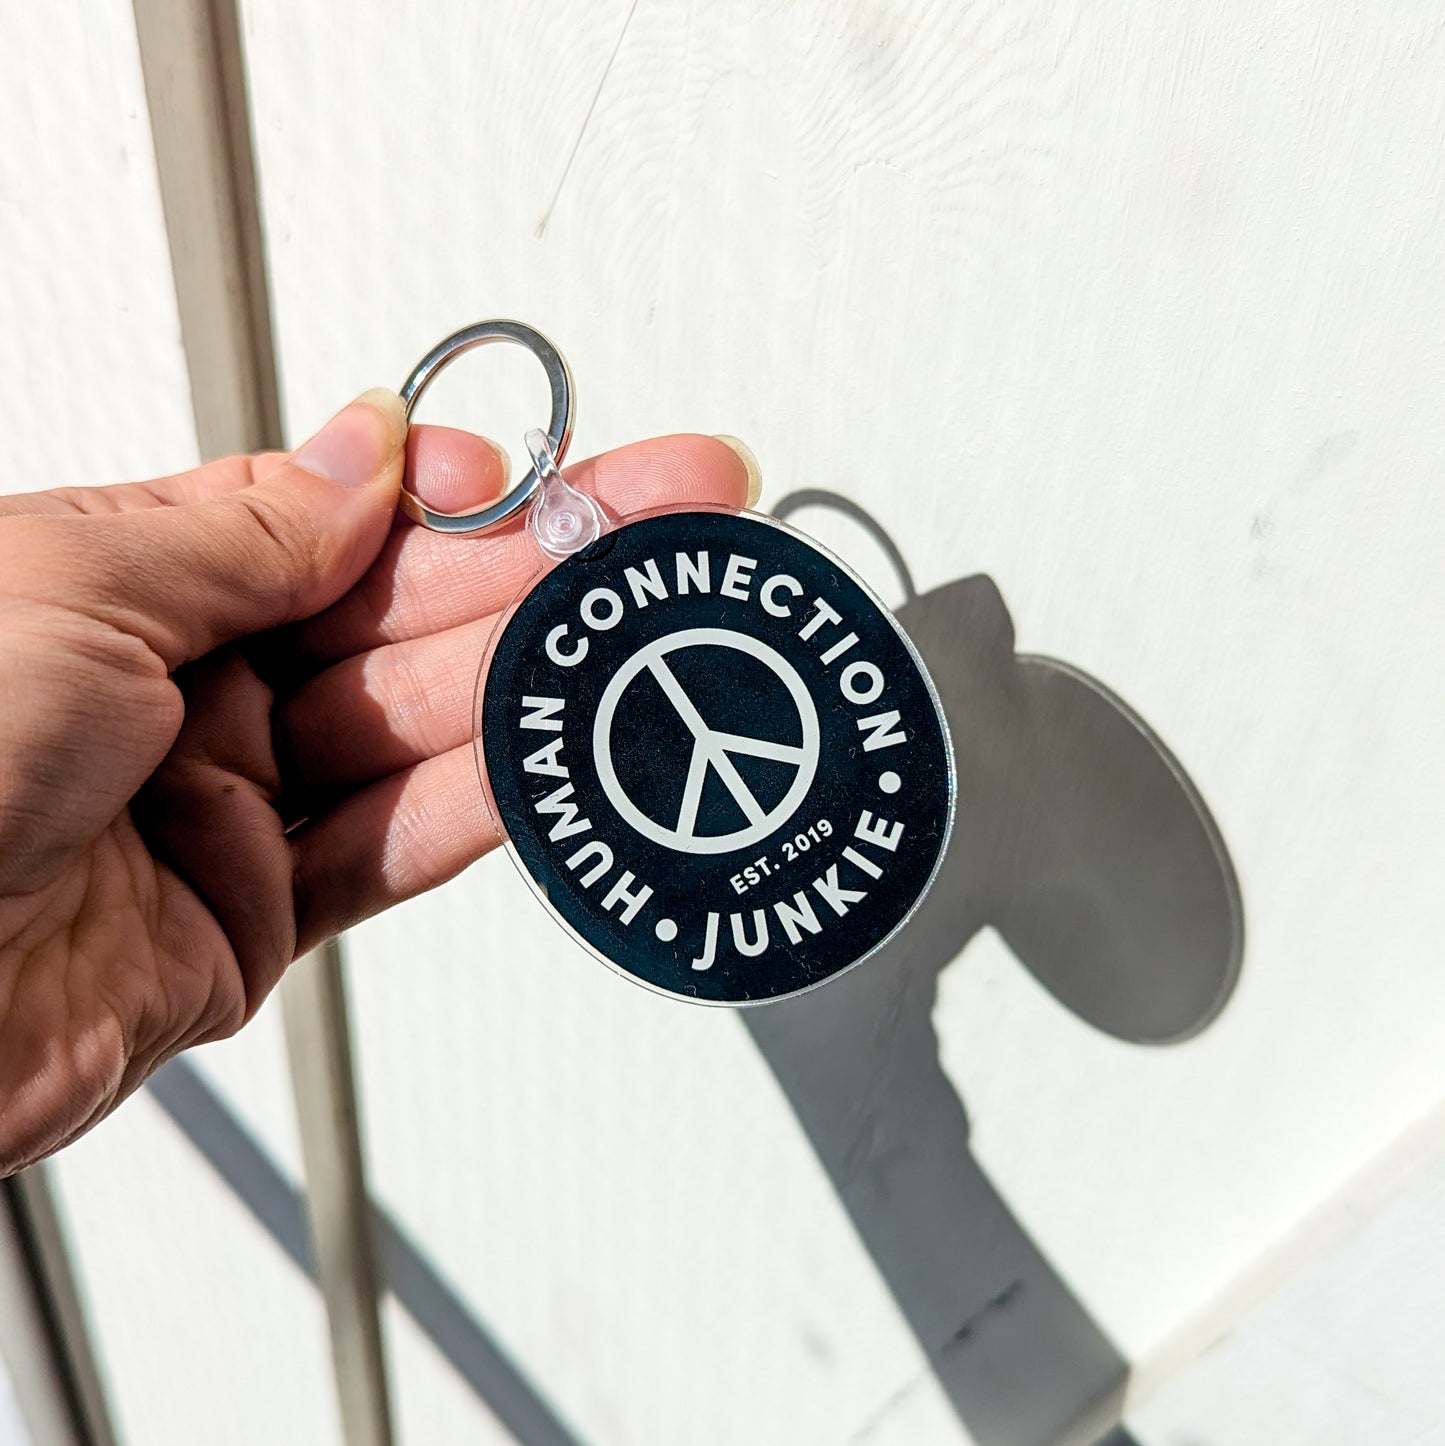 Human Connection Junkie Key Chain